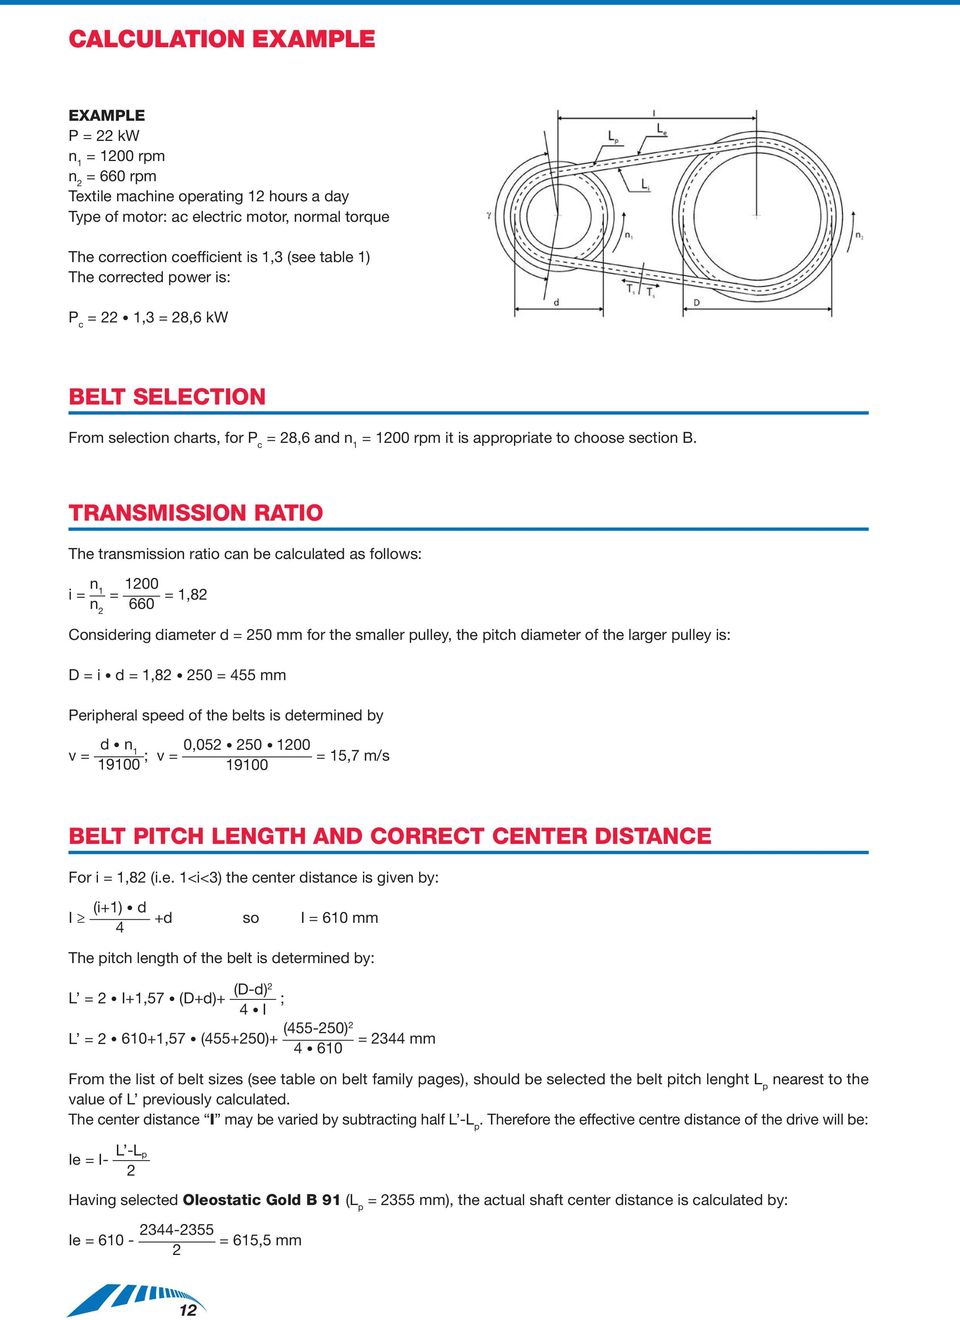 TRANSMISSION RATIO The transmission ratio can be calculated as follows: i = n 1 = 1200 n 2 660 = 1,82 Considering diameter d = 250 mm for the smaller pulley, the pitch diameter of the larger pulley